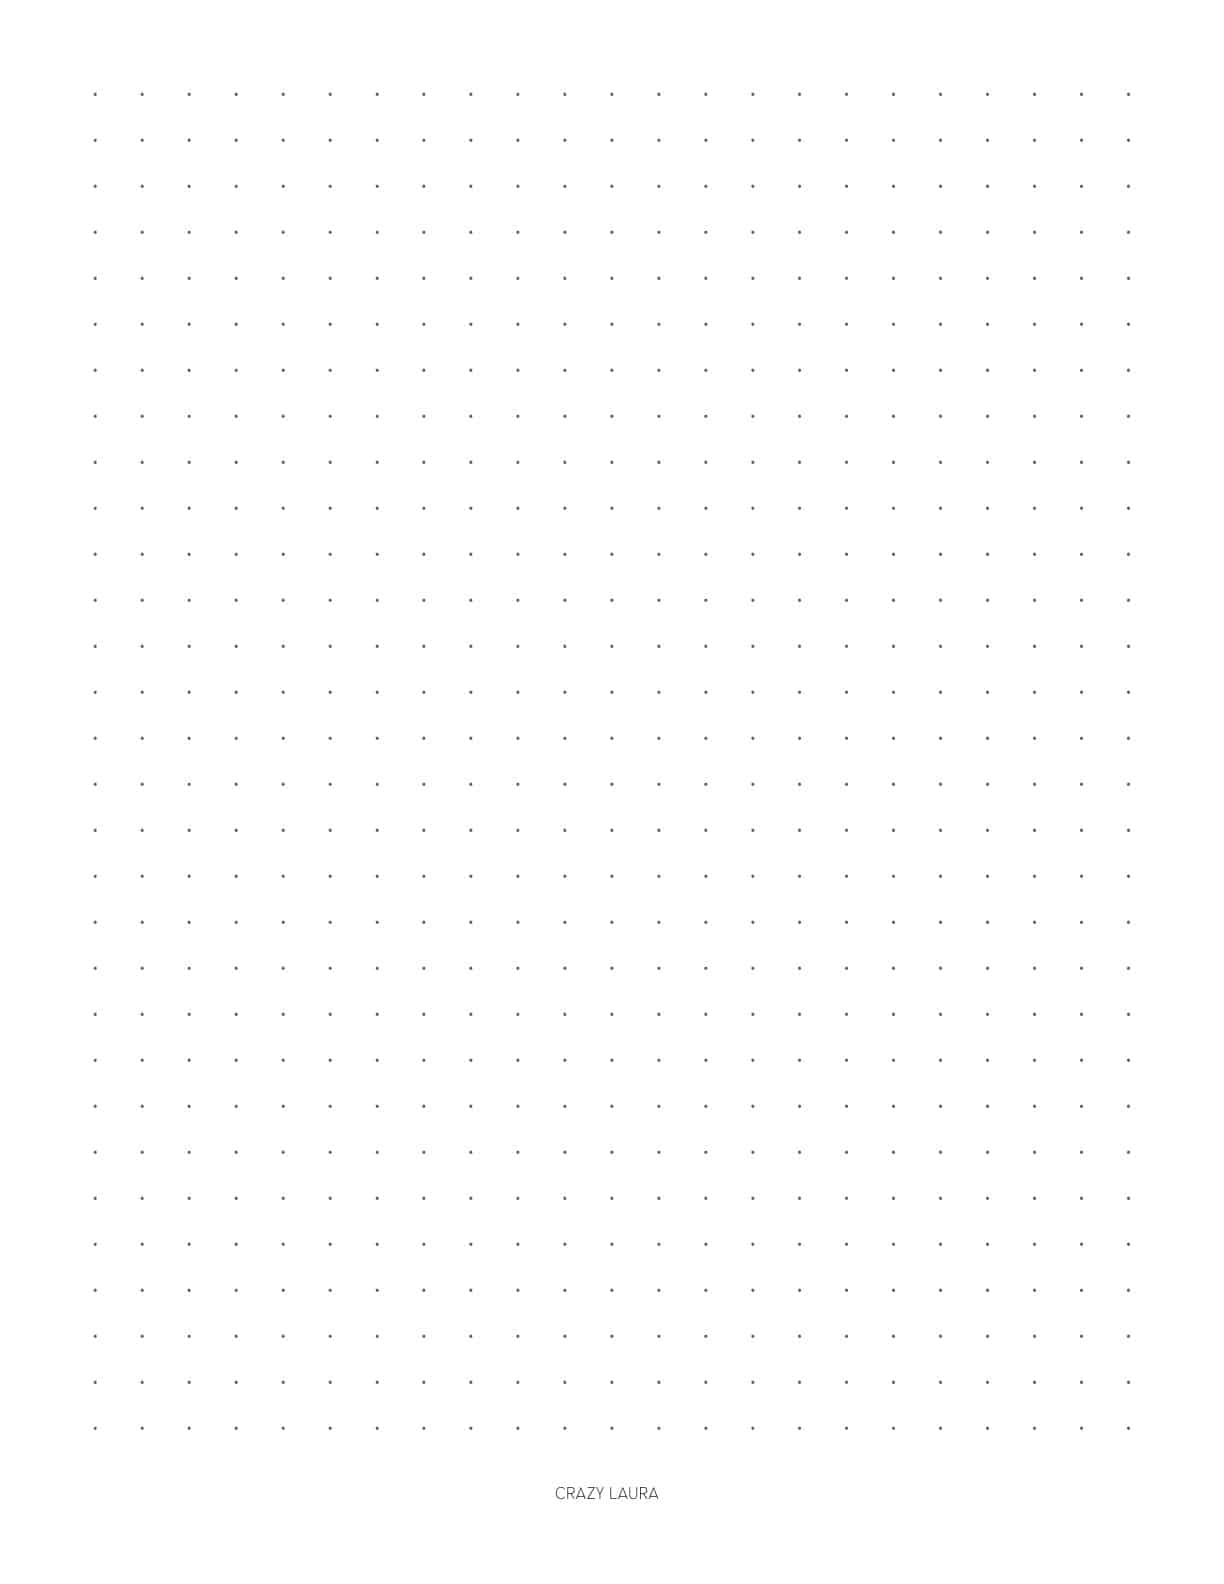 large dotted grid paper